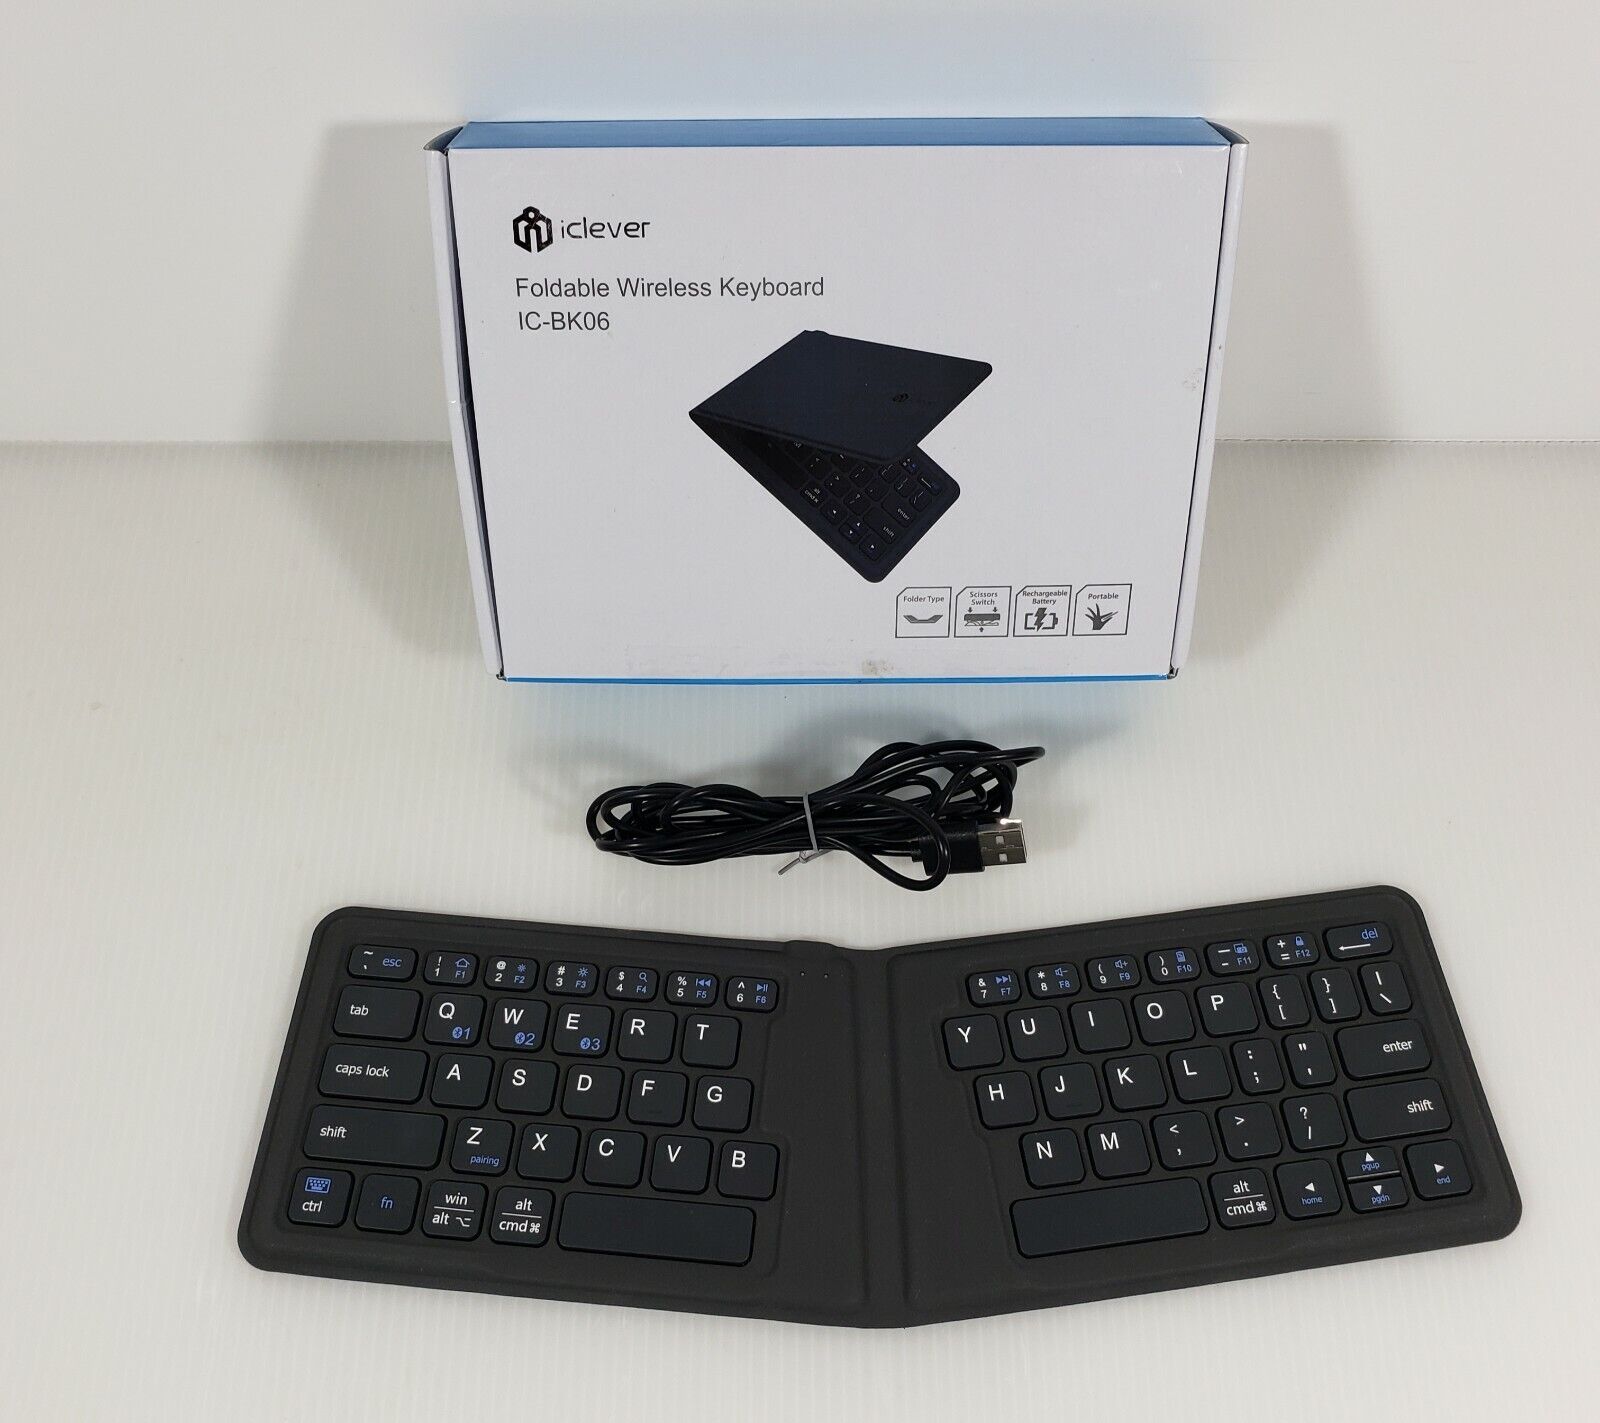 iClever Mini Portable Bluetooth Wireless Keyboard Folding Rechargeable IC-BK06